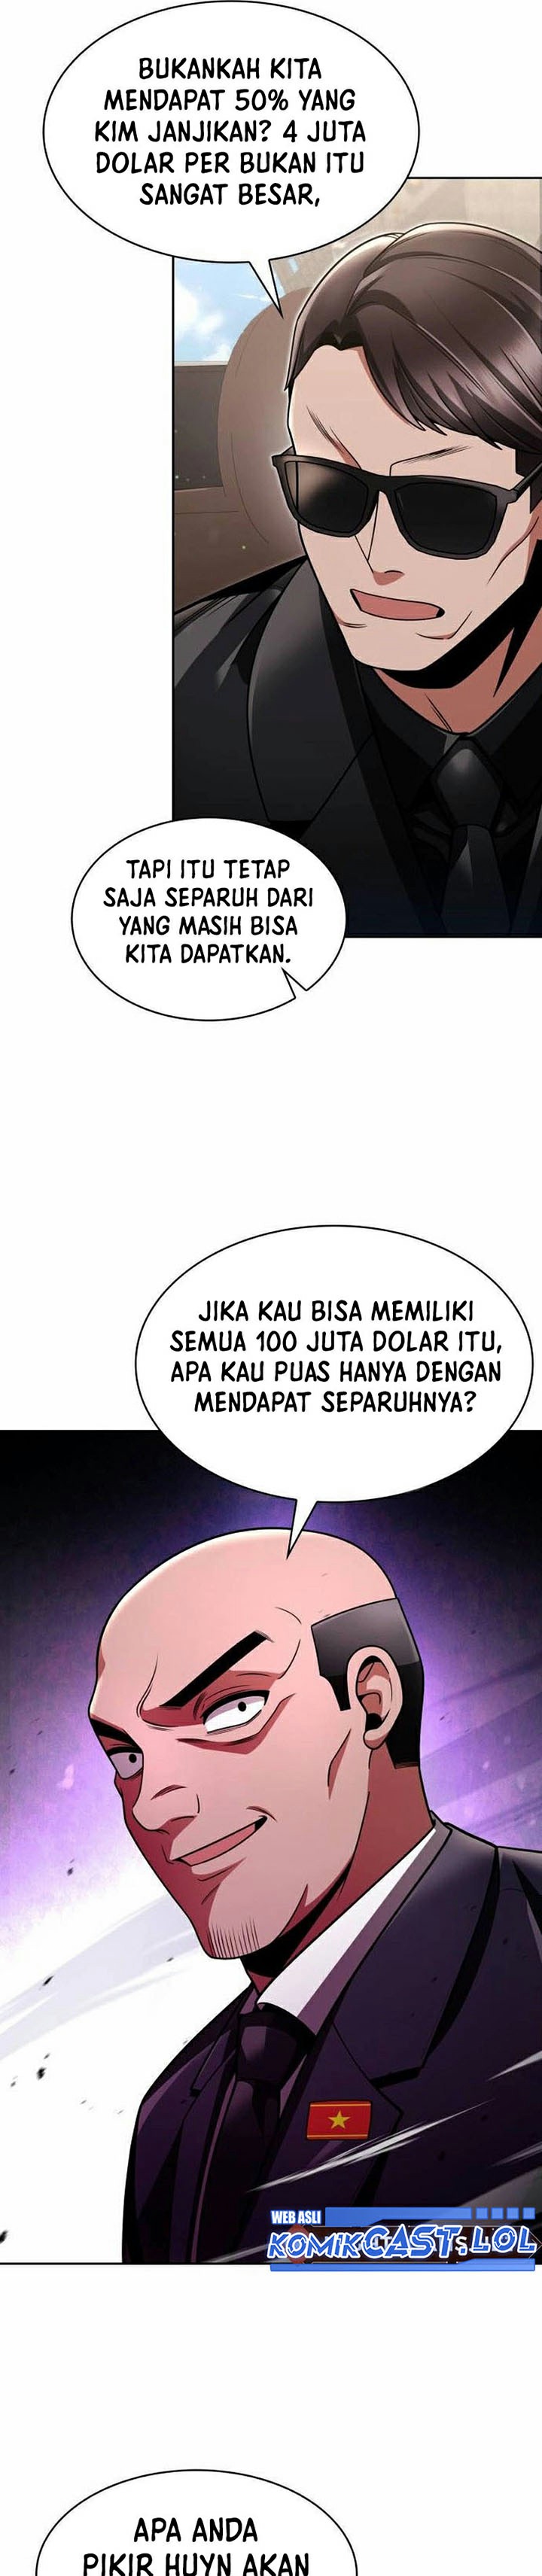 Dilarang COPAS - situs resmi www.mangacanblog.com - Komik clever cleaning life of the returned genius hunter 062 - chapter 62 63 Indonesia clever cleaning life of the returned genius hunter 062 - chapter 62 Terbaru 29|Baca Manga Komik Indonesia|Mangacan